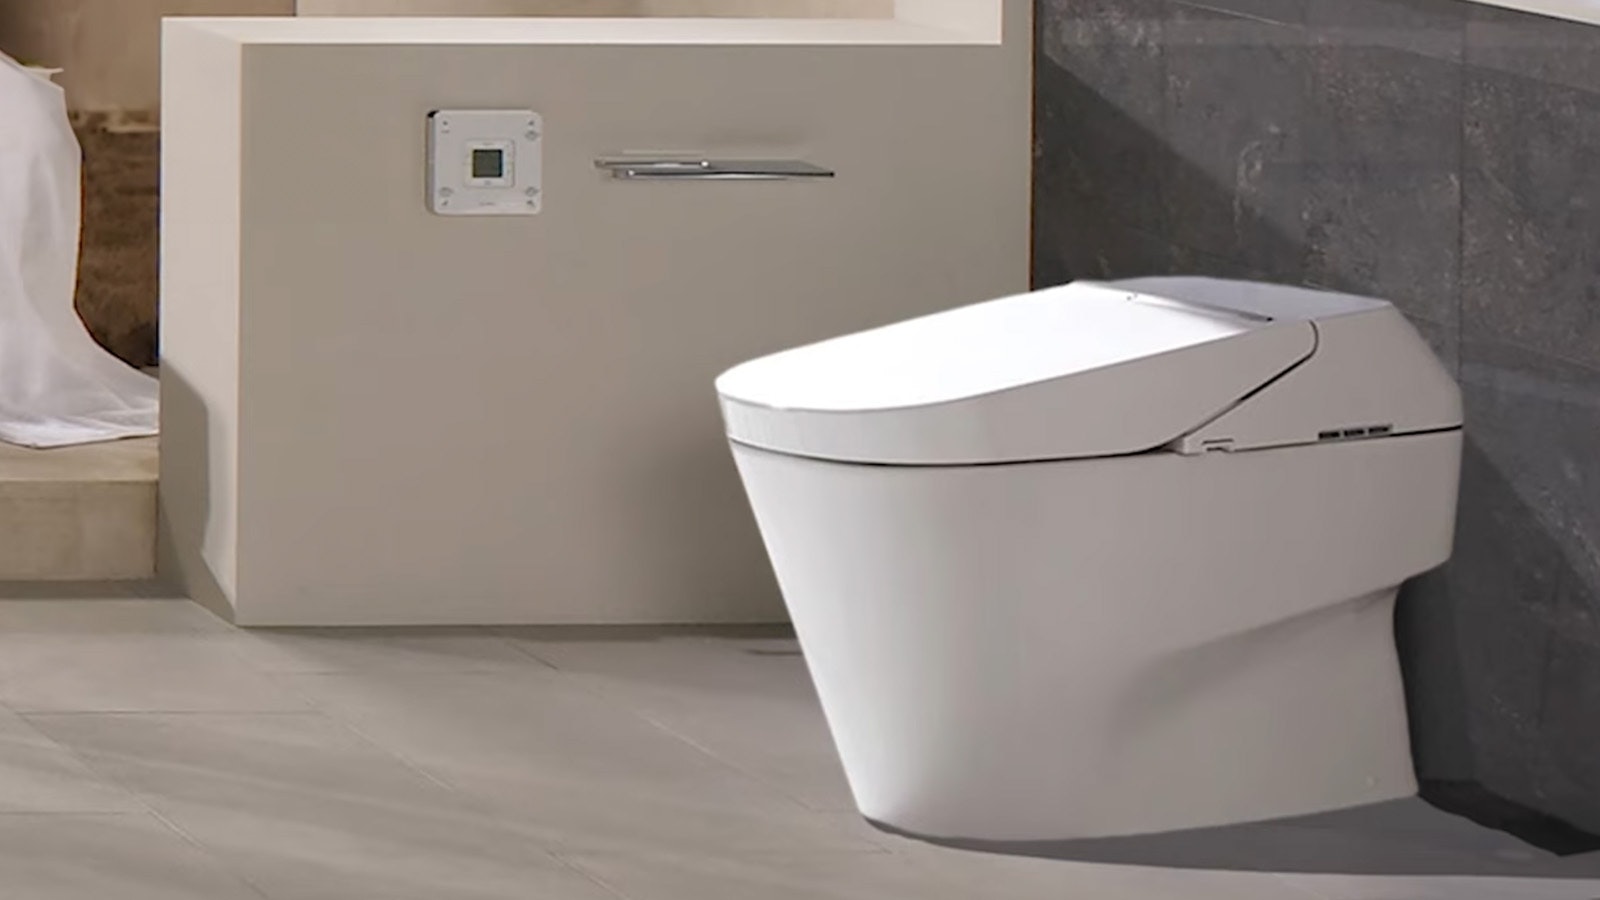 Another model of smart toilet by Toto, the Neoresrt 700H.